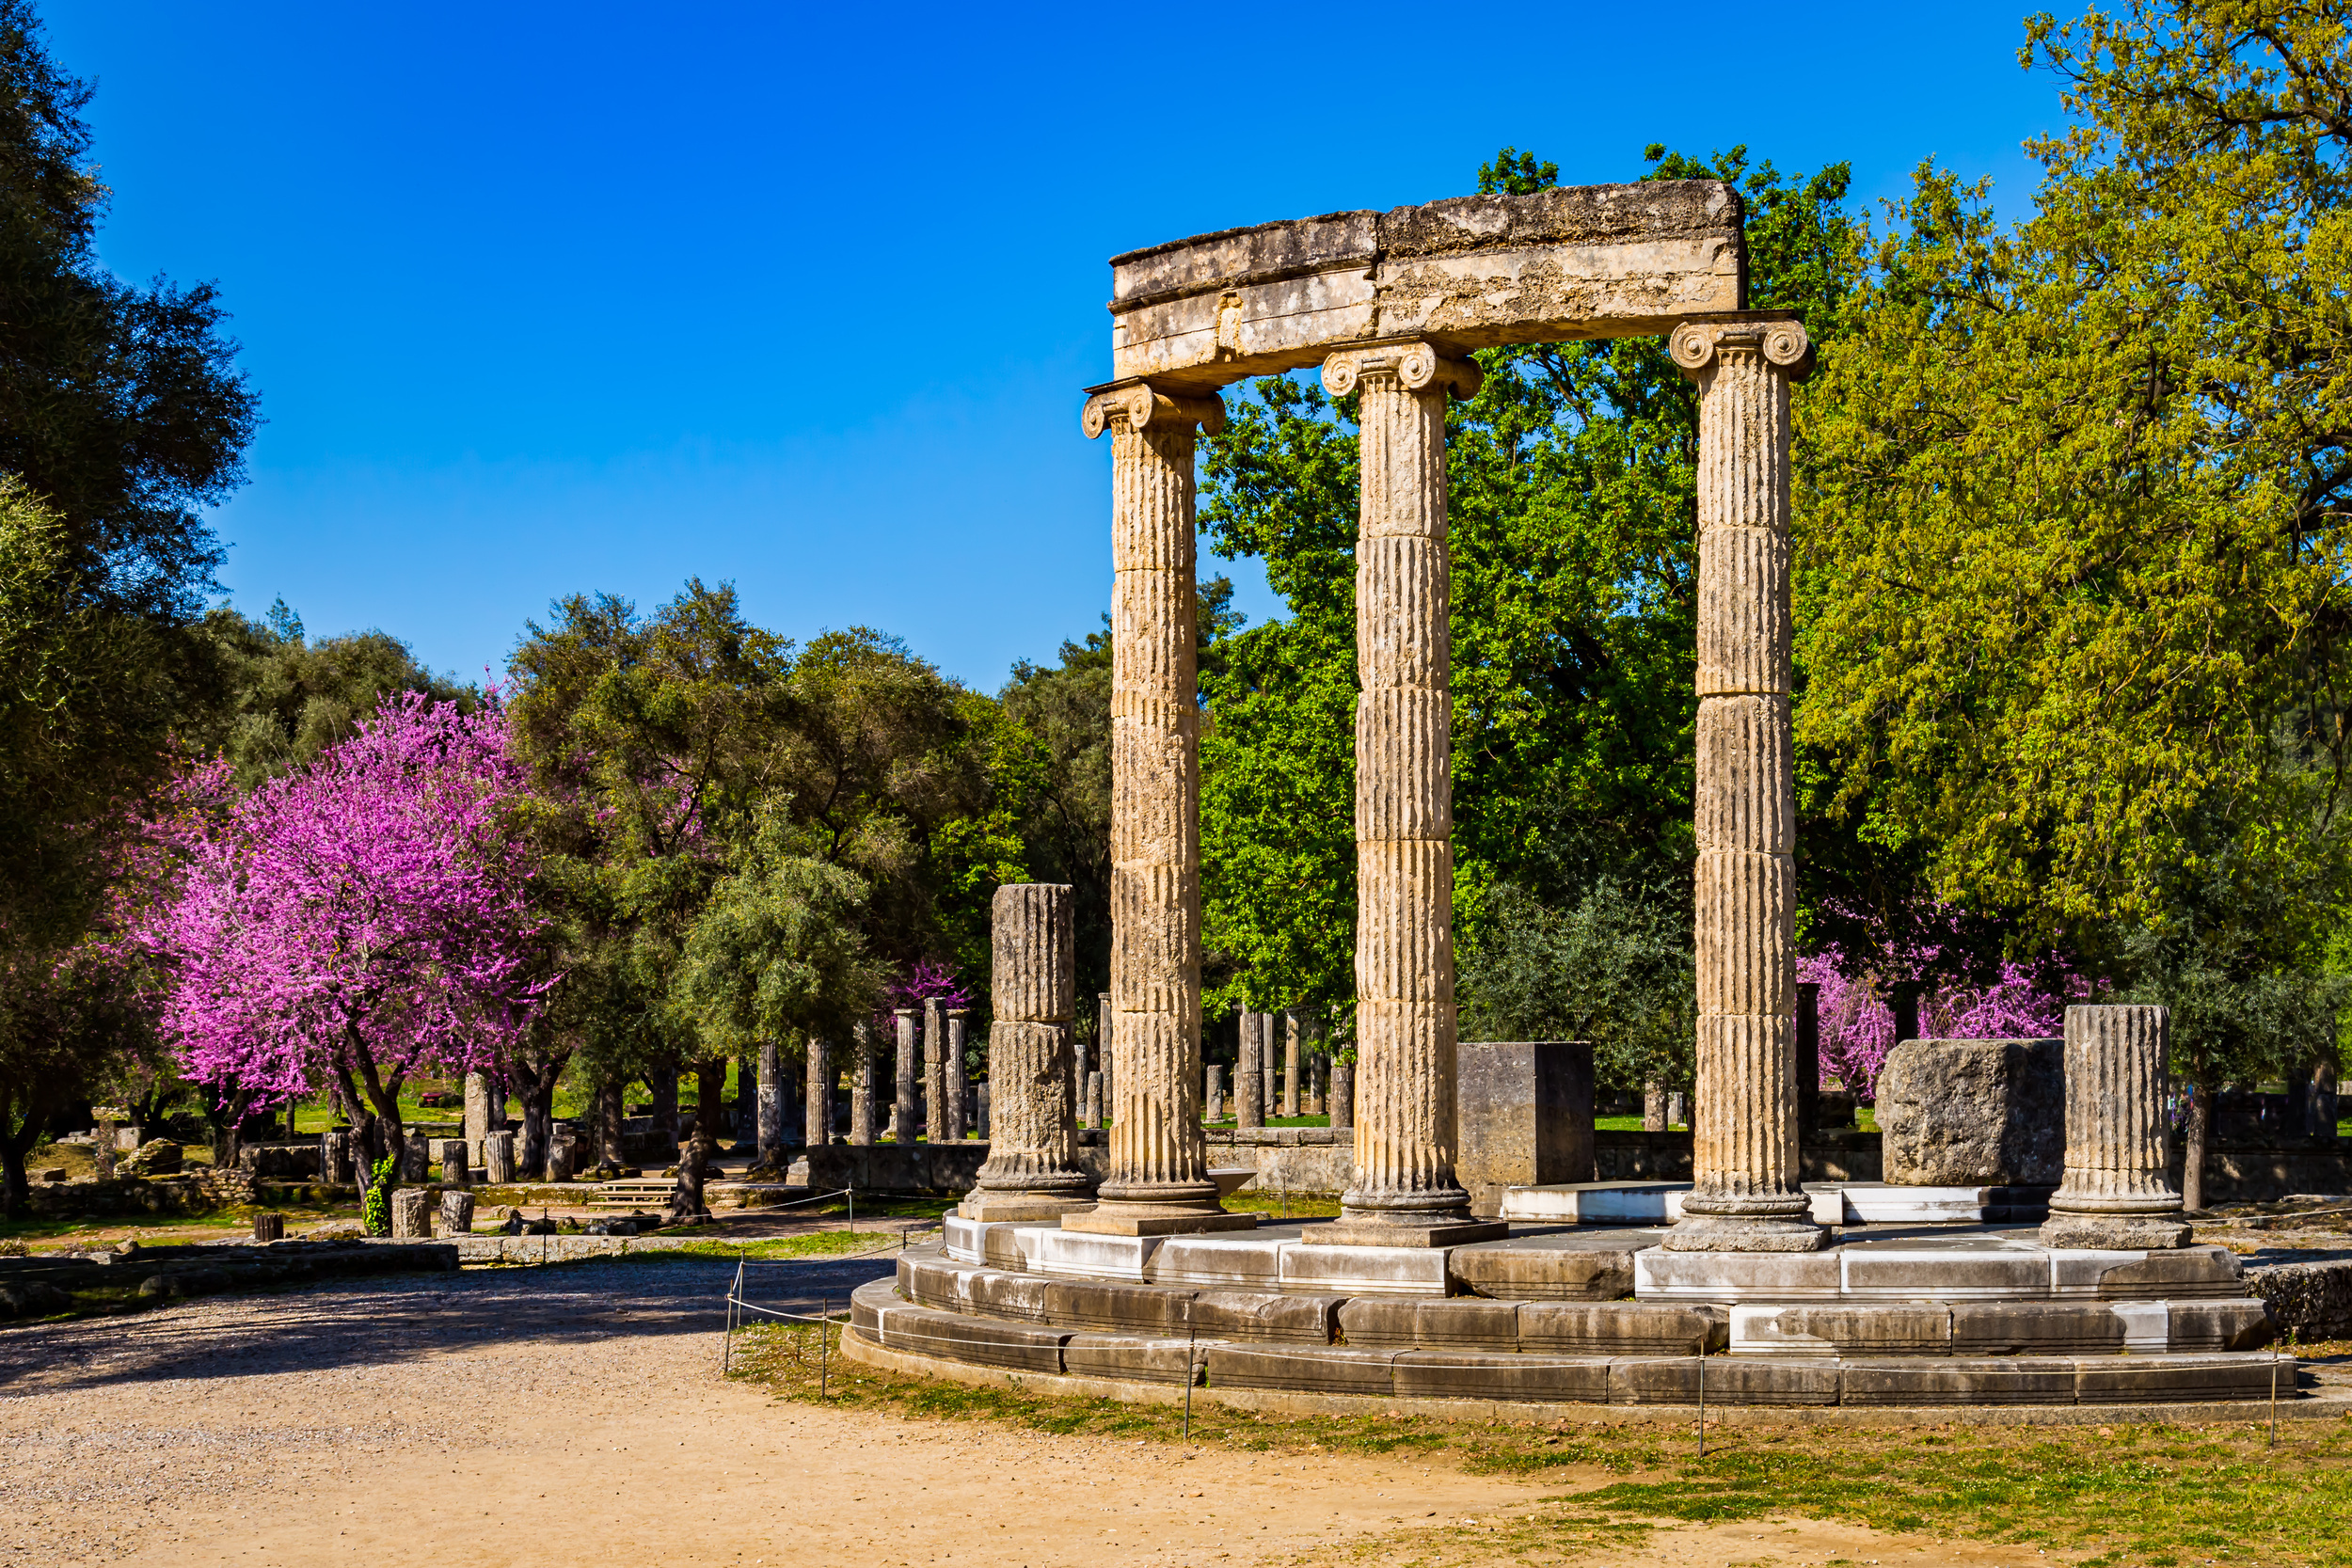 <p>On the Peloponnese Peninsula lies another must-visit, Olympia, the location of the original Olympics. You can tour the Ancient Stadium, temples, and an amazing museum. Next to the site is an adorable village with many amenities, making for a great day!</p><p>You may also like: <a href='https://www.yardbarker.com/lifestyle/articles/18_eco_friendly_tips_for_staying_cool/s1__37653152'>18 eco-friendly tips for staying cool</a></p>